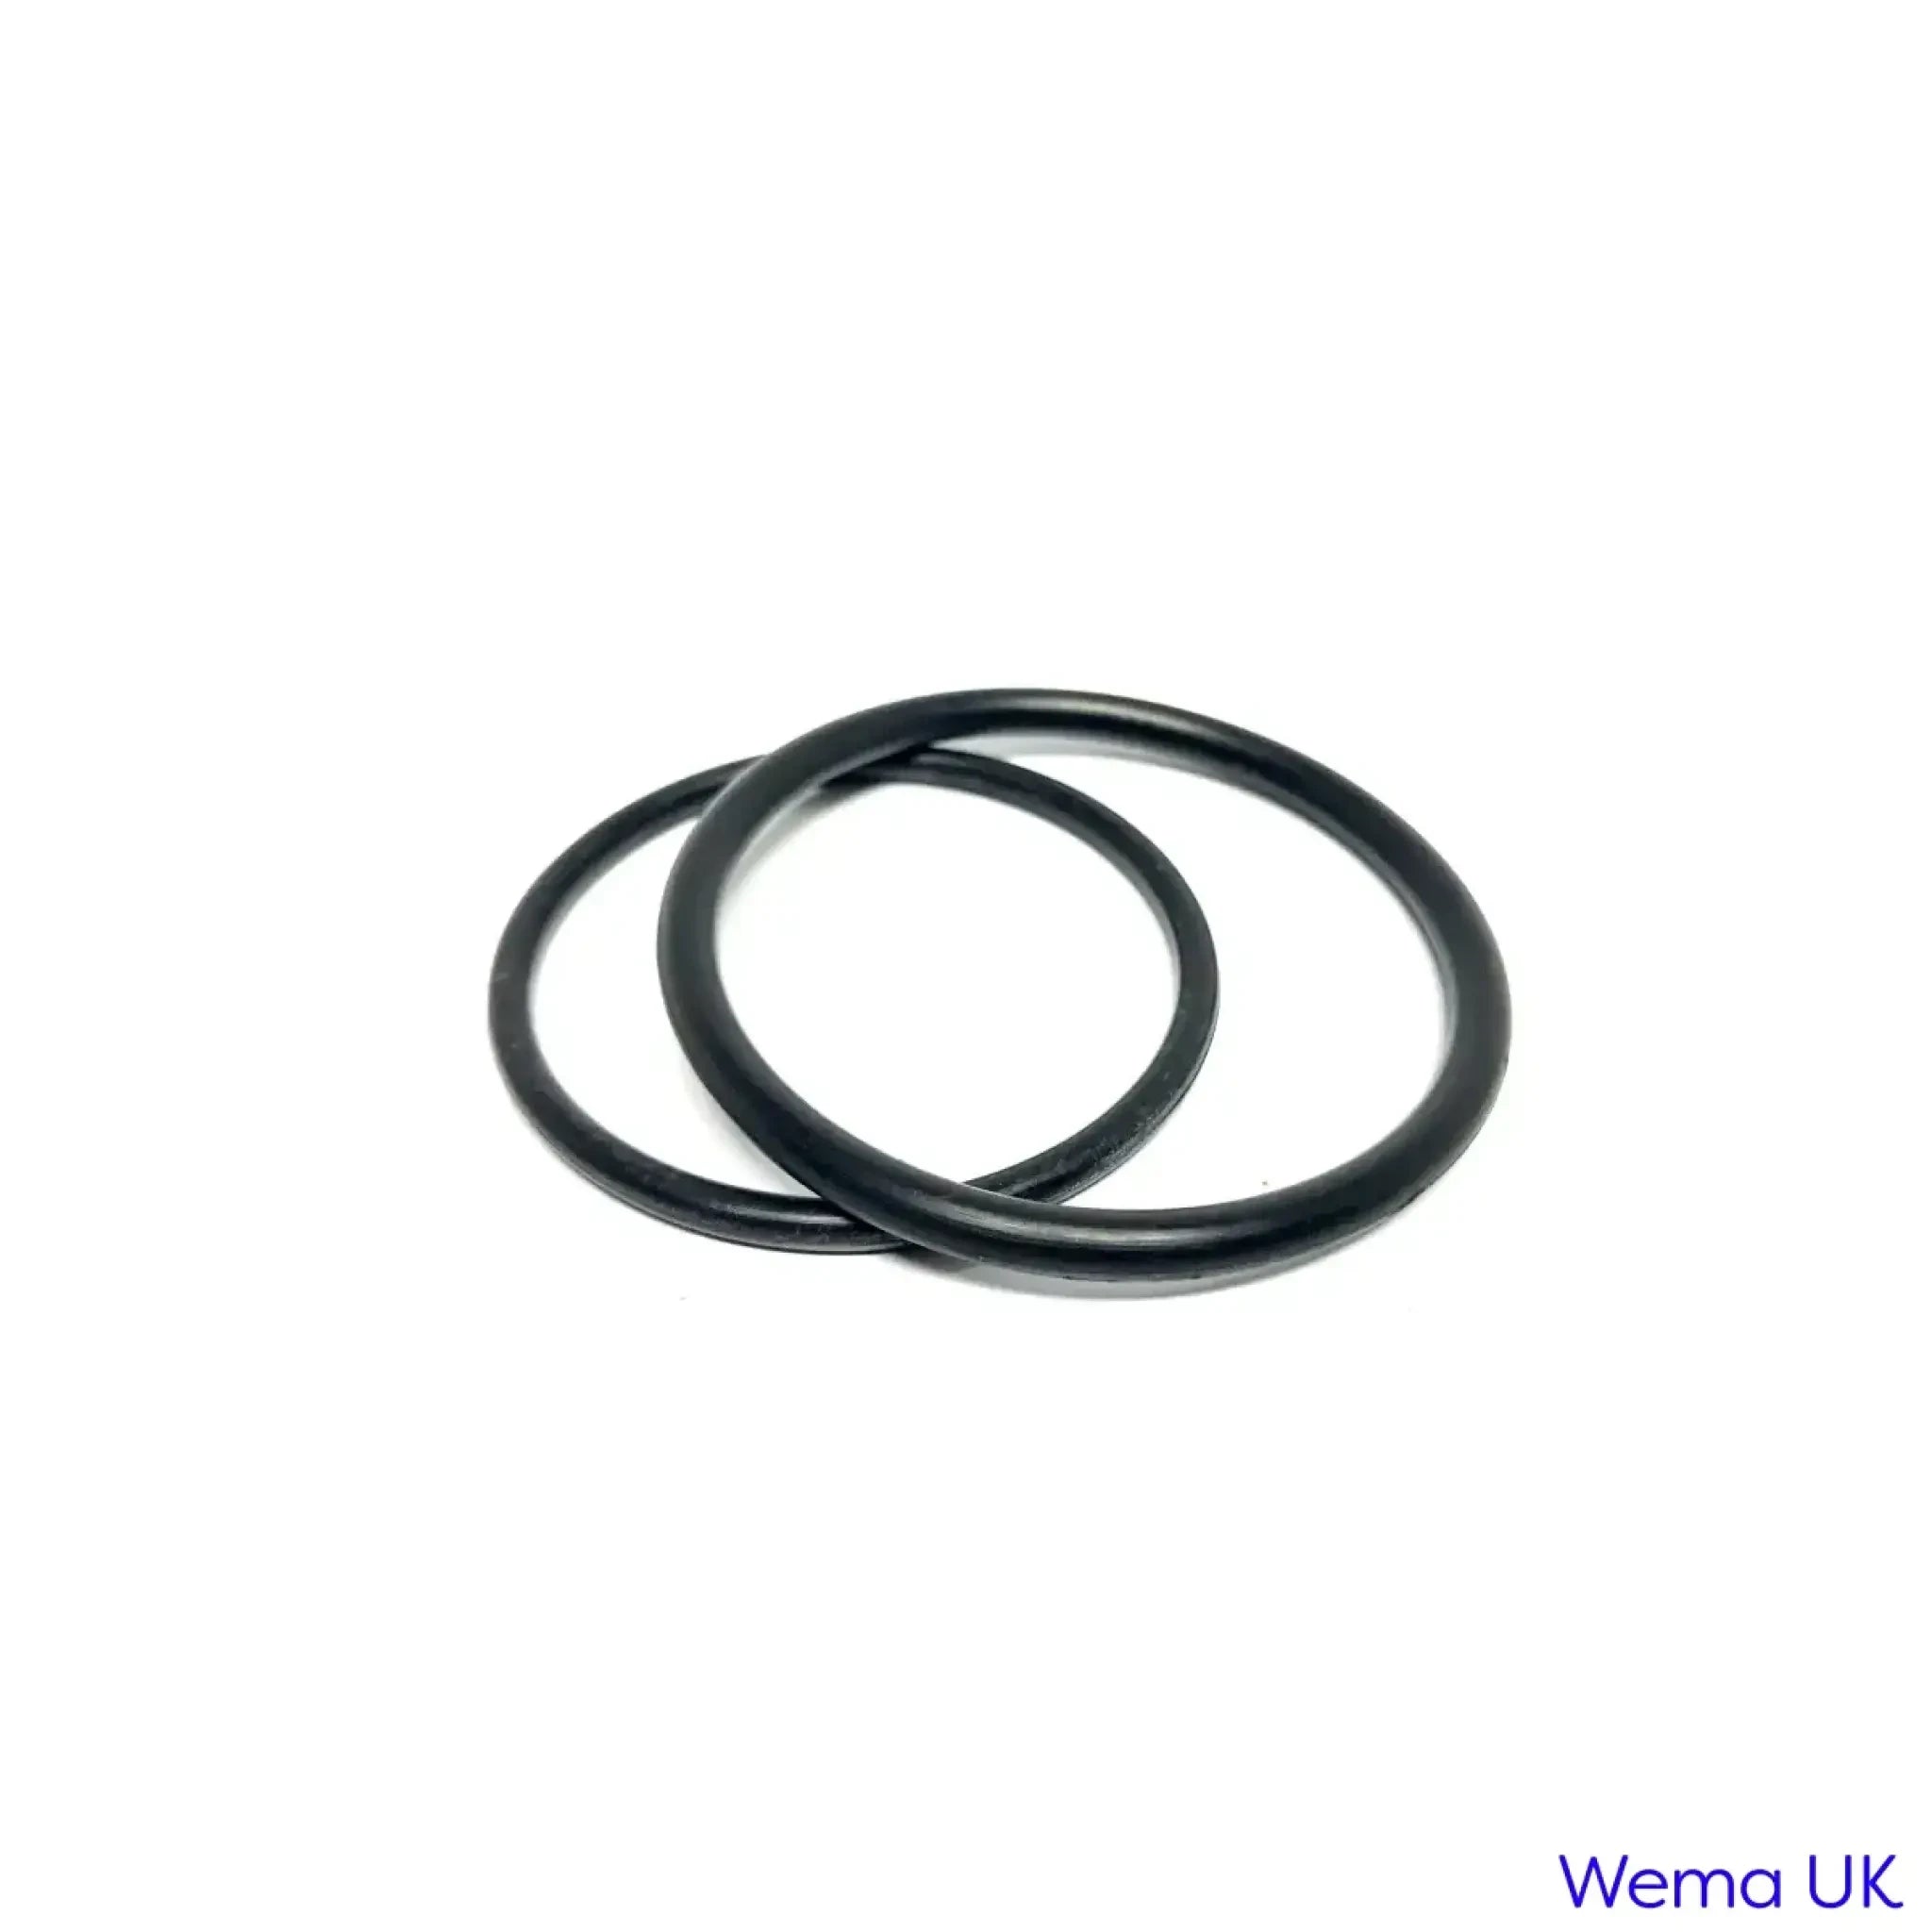 Replacement Nitrile O’Rings / Gaskets - S3 Sender